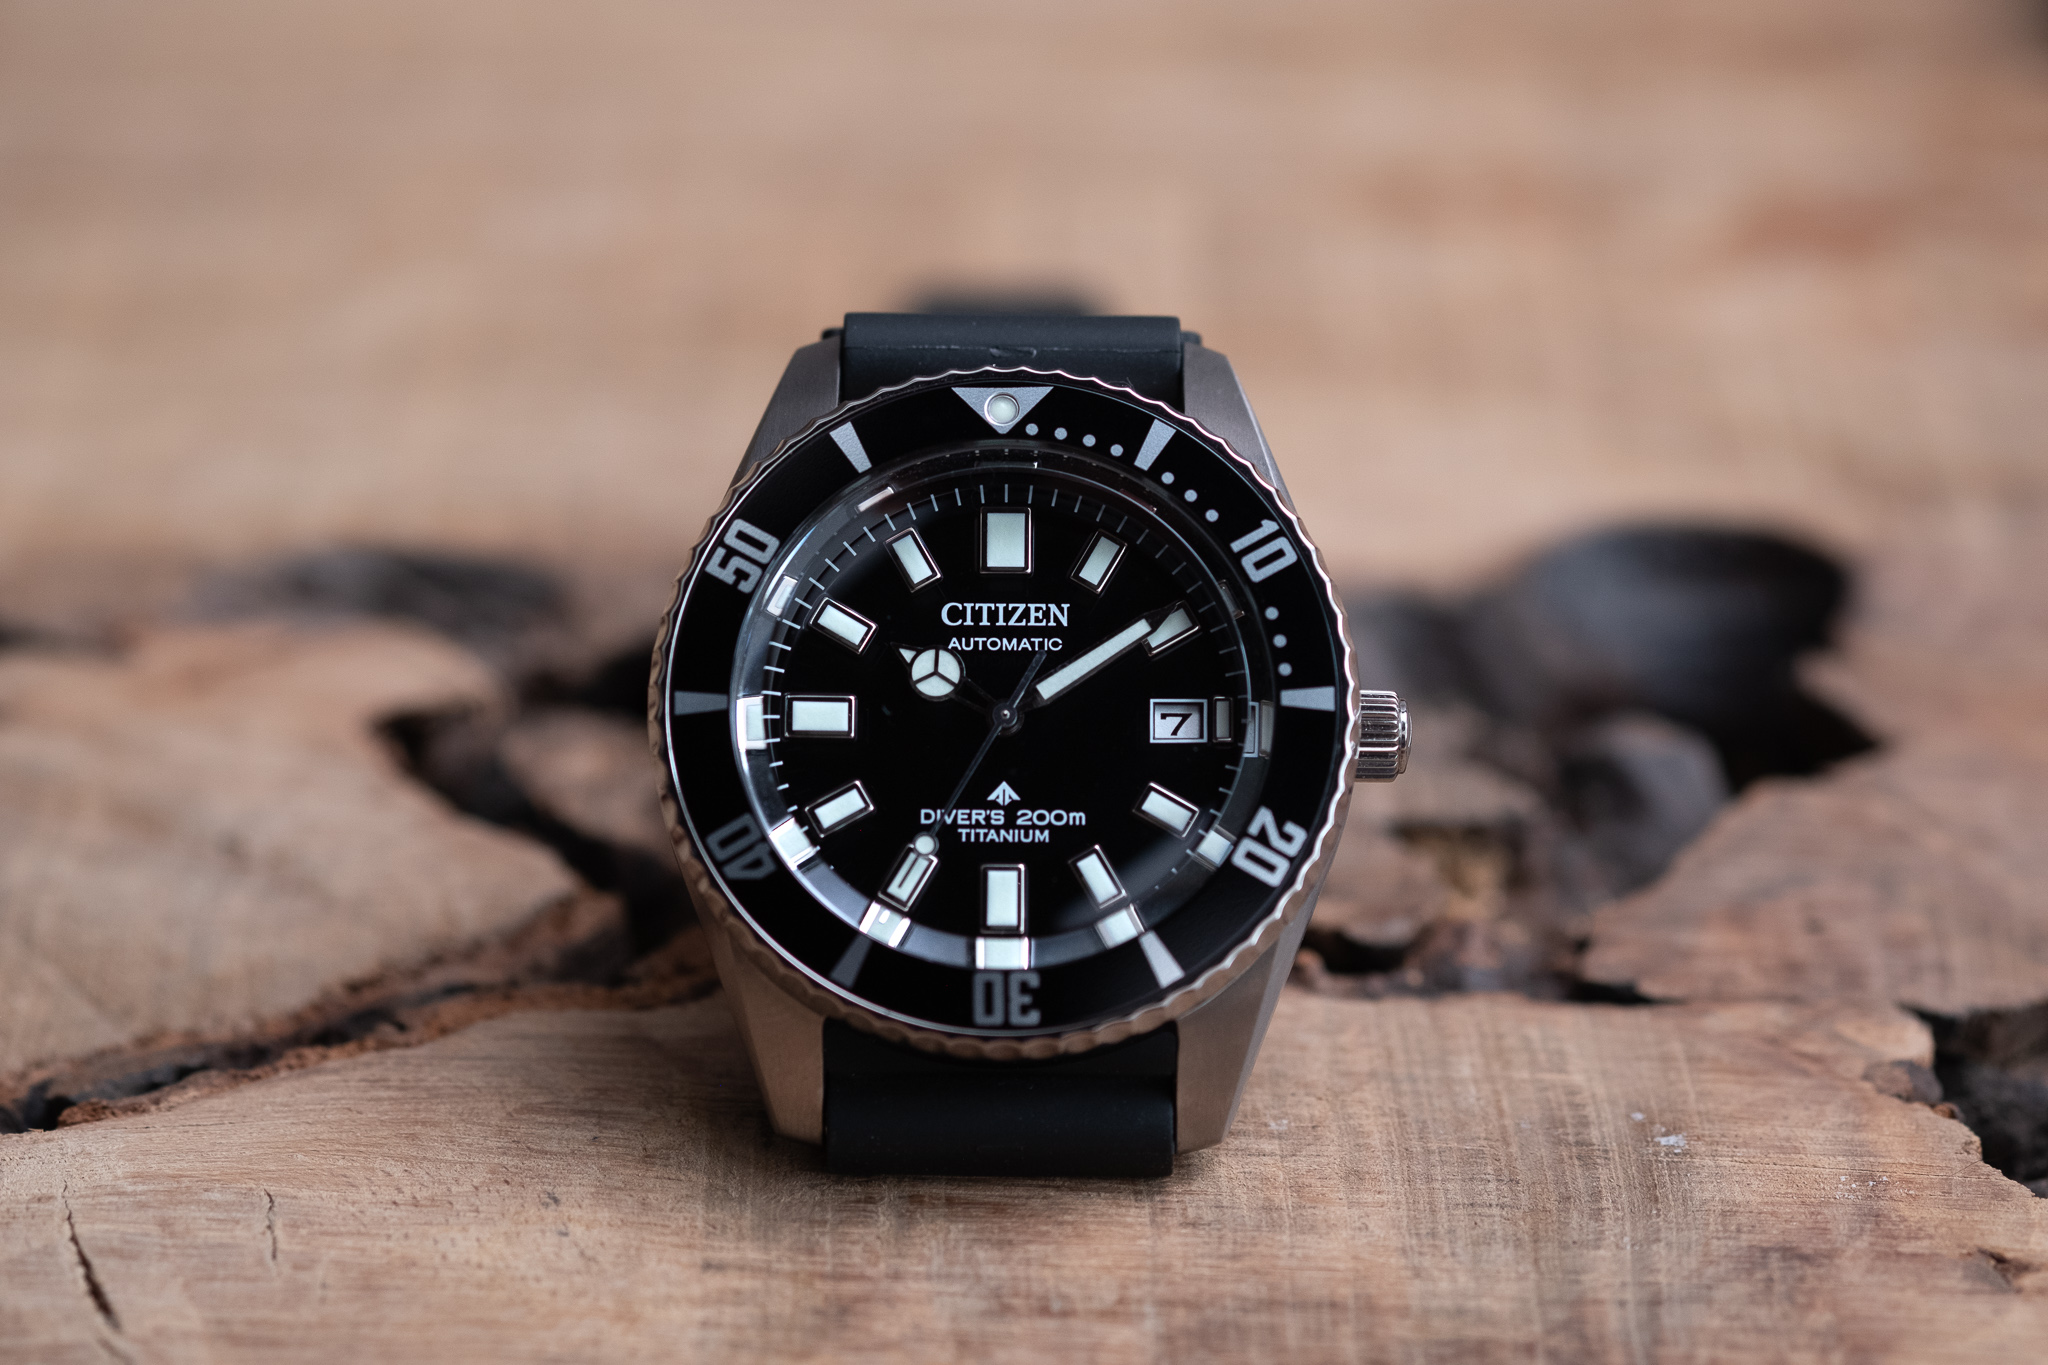 Introducing the Citizen Promaster Mechanical Diver 200m ref. NB6021